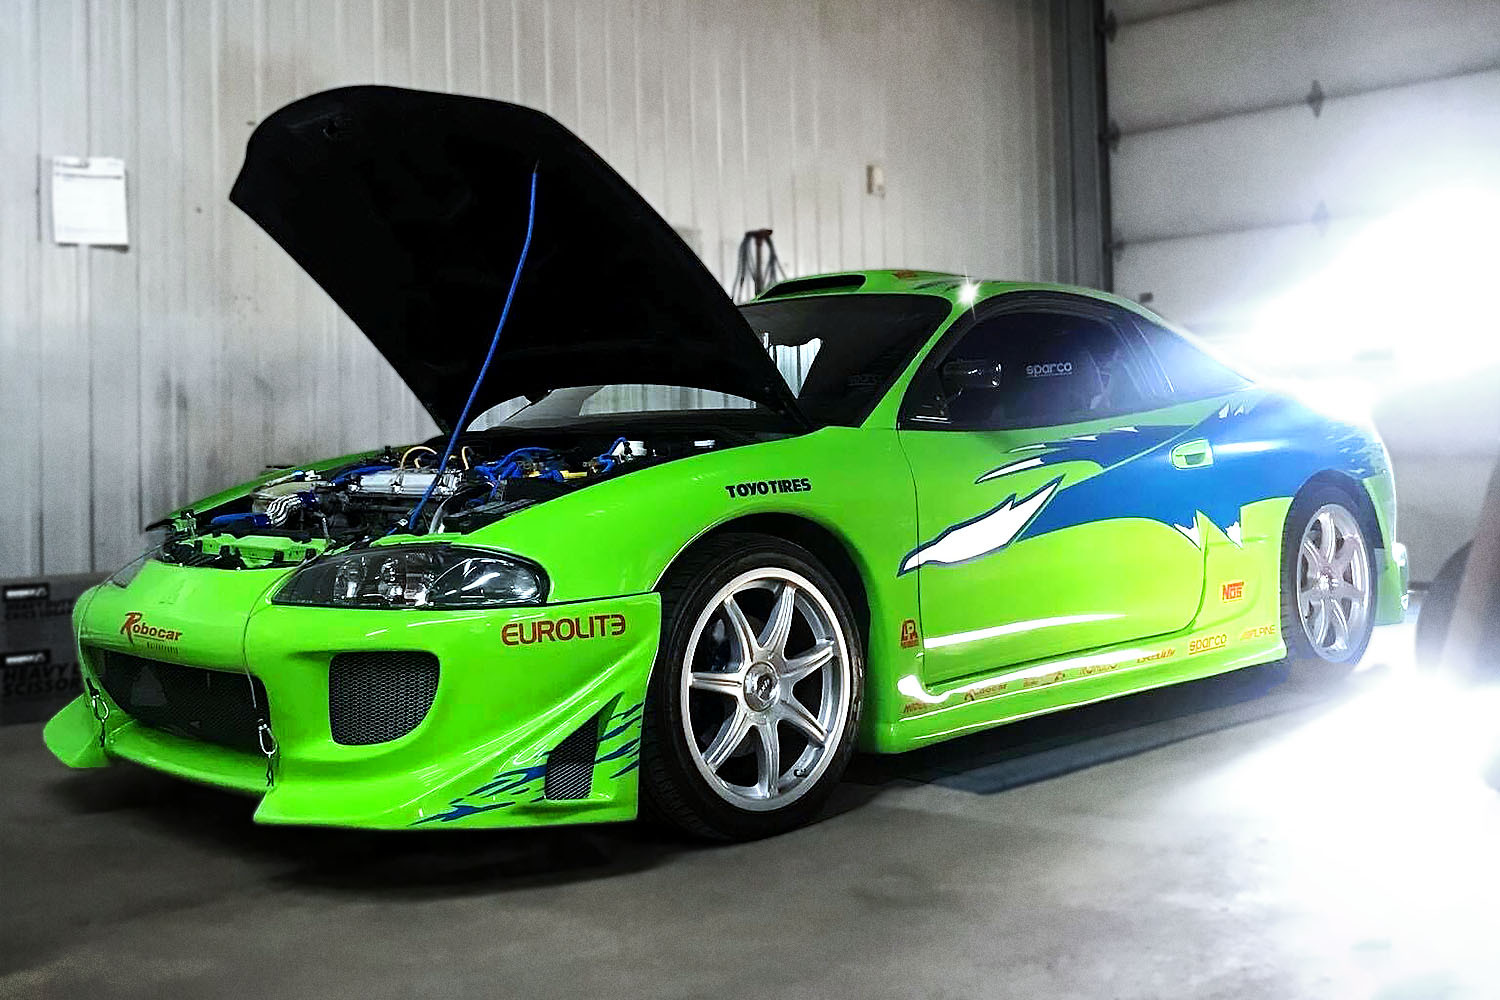 A replica of the green 1995 Mitsubishi Eclipse Paul Walker driver in the first Fast and Furious movie, this one built by Dominic Dubreuil